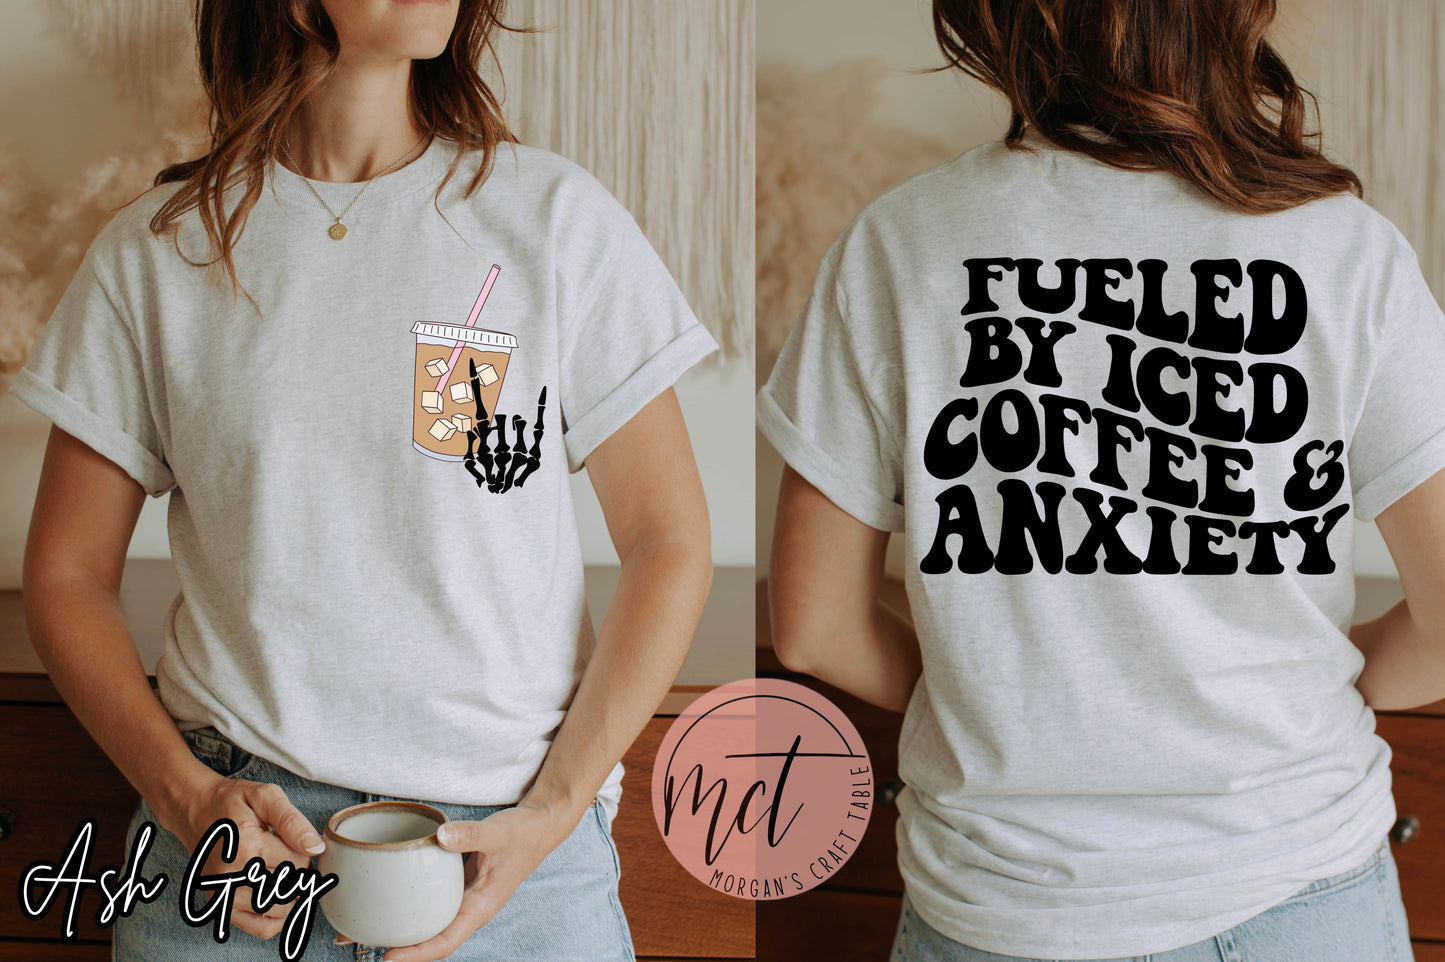 “Fueled By” Apparel